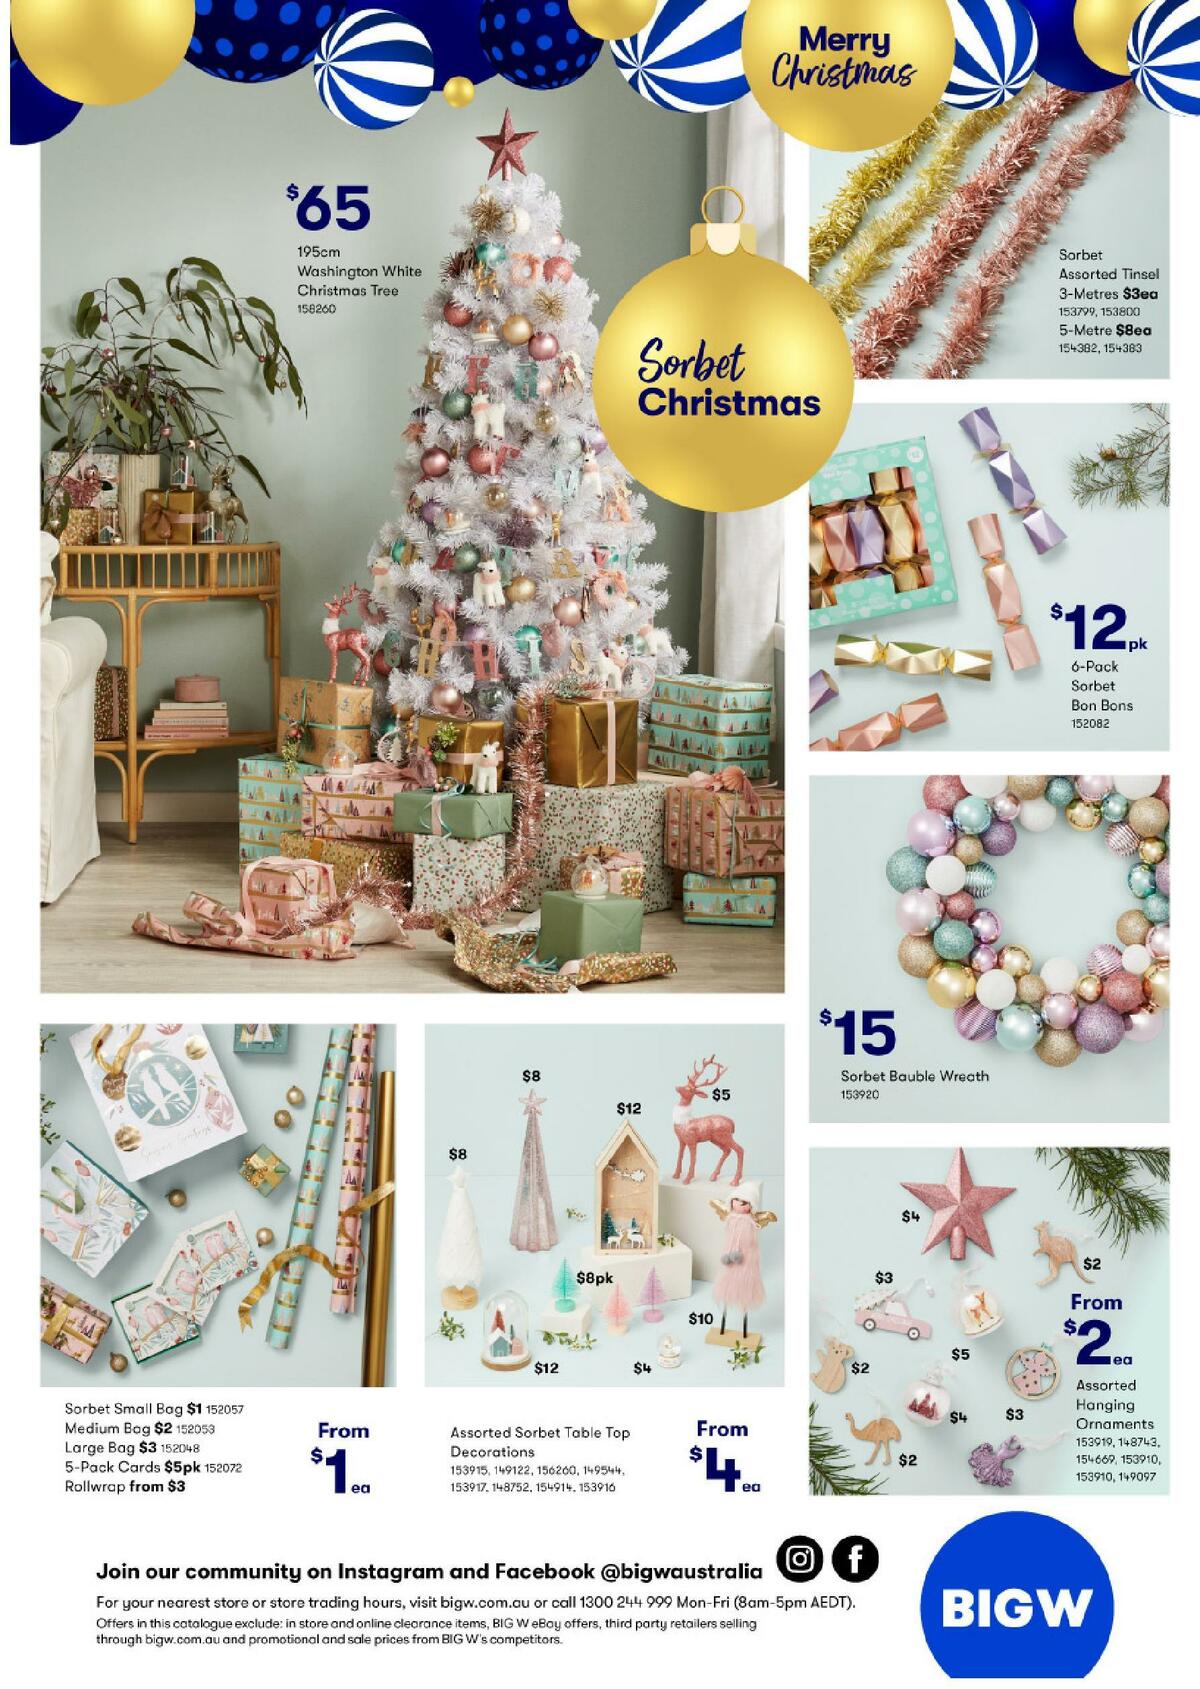 Big W Catalogues from 11 November